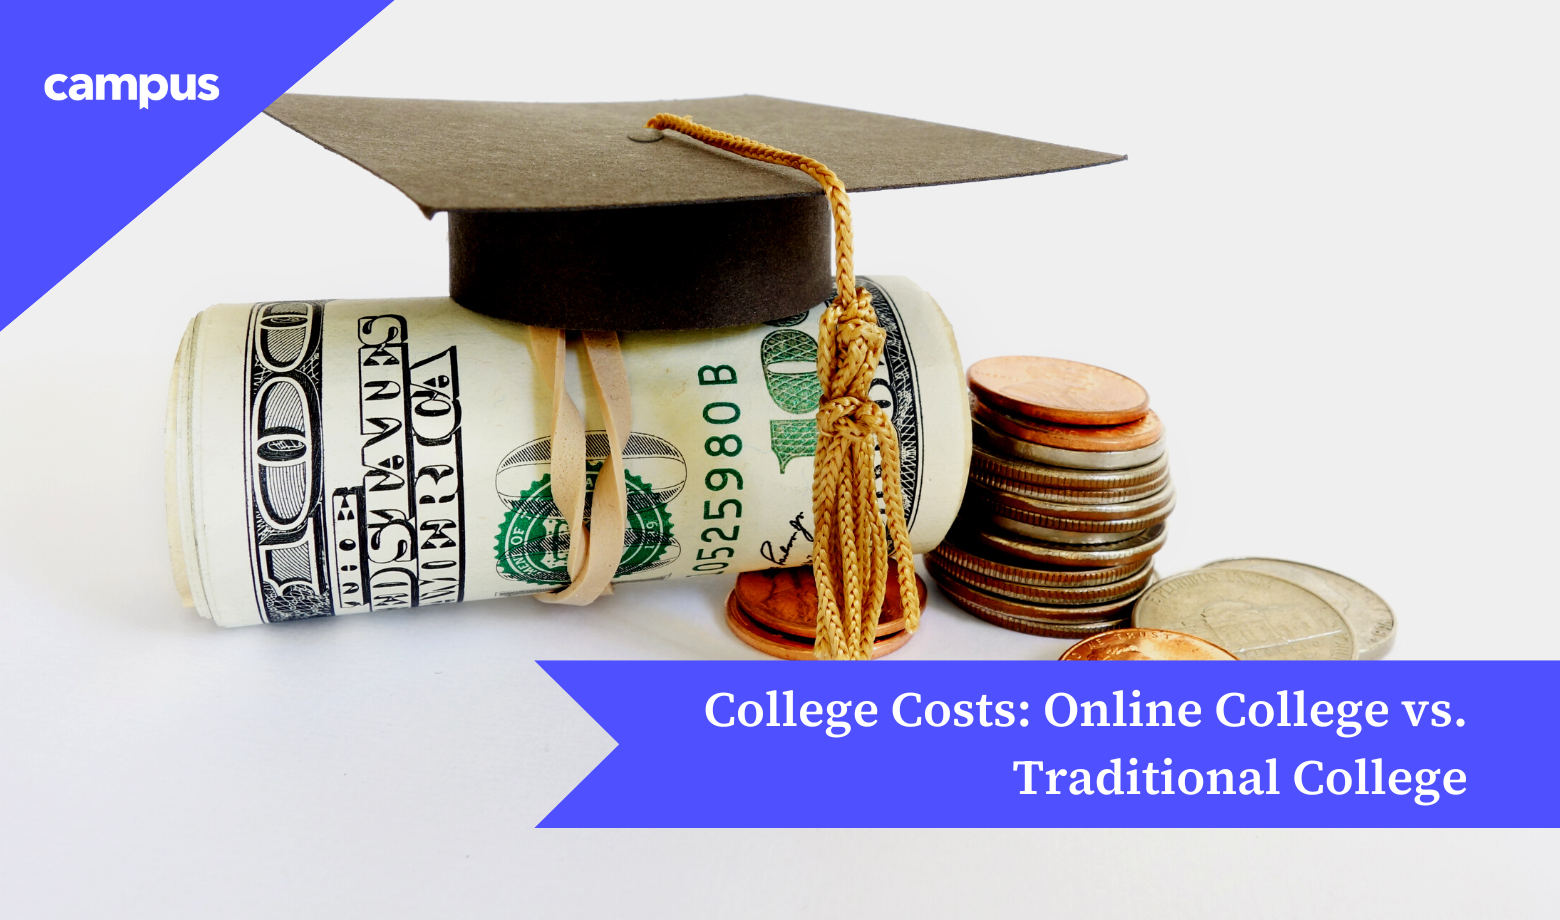 College Costs: Online College vs Traditional College